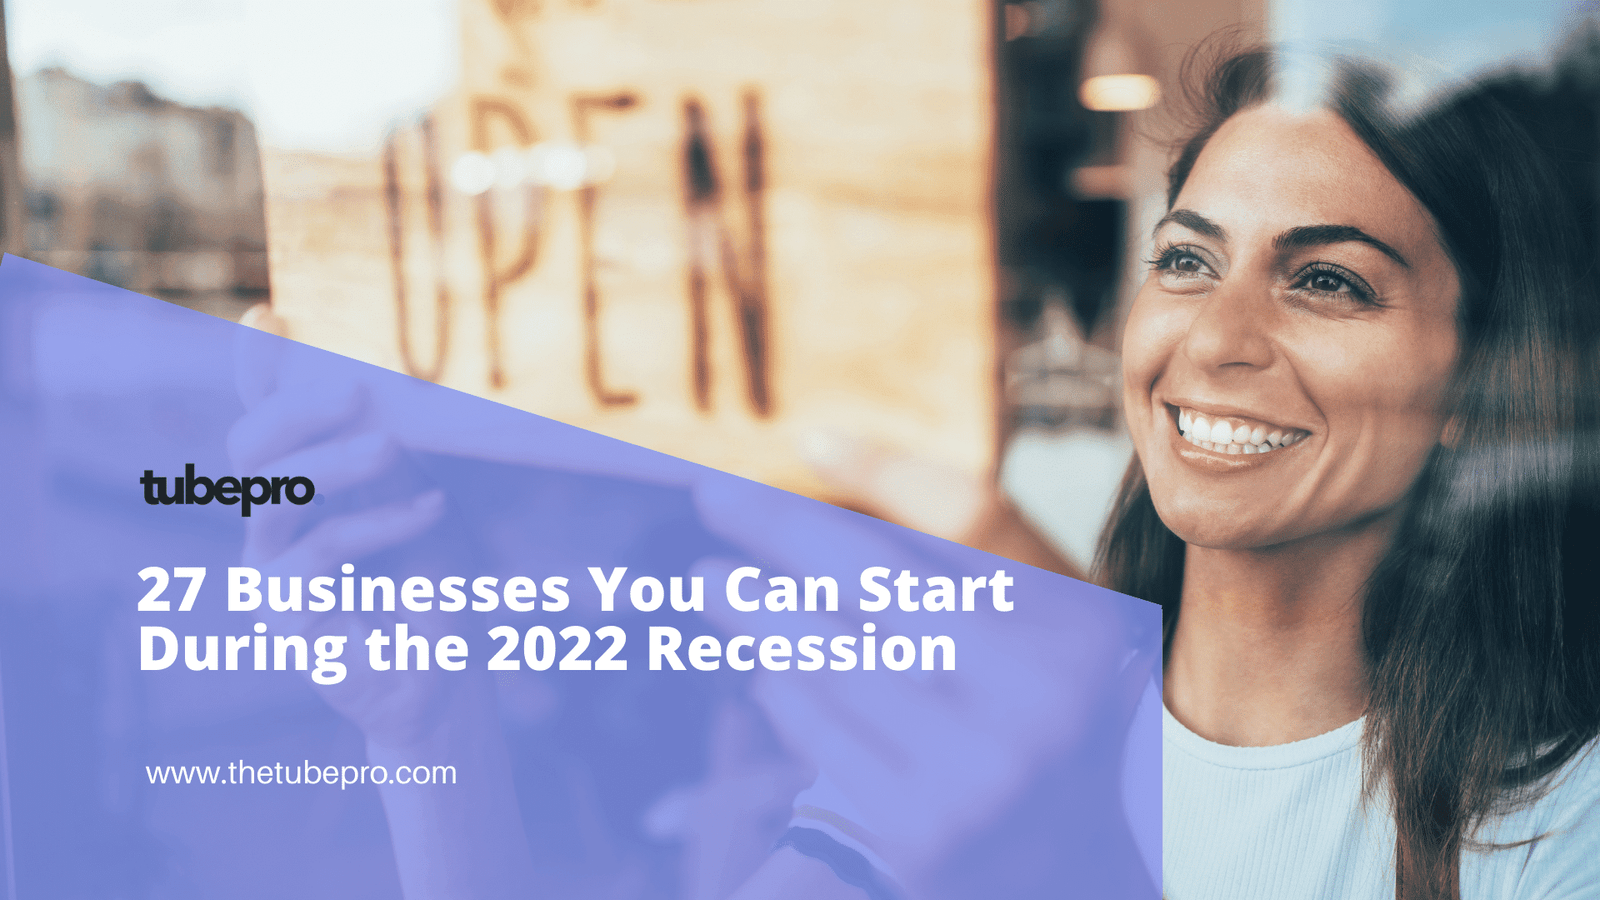 27 Businesses You Can Start During the 2022 Recession